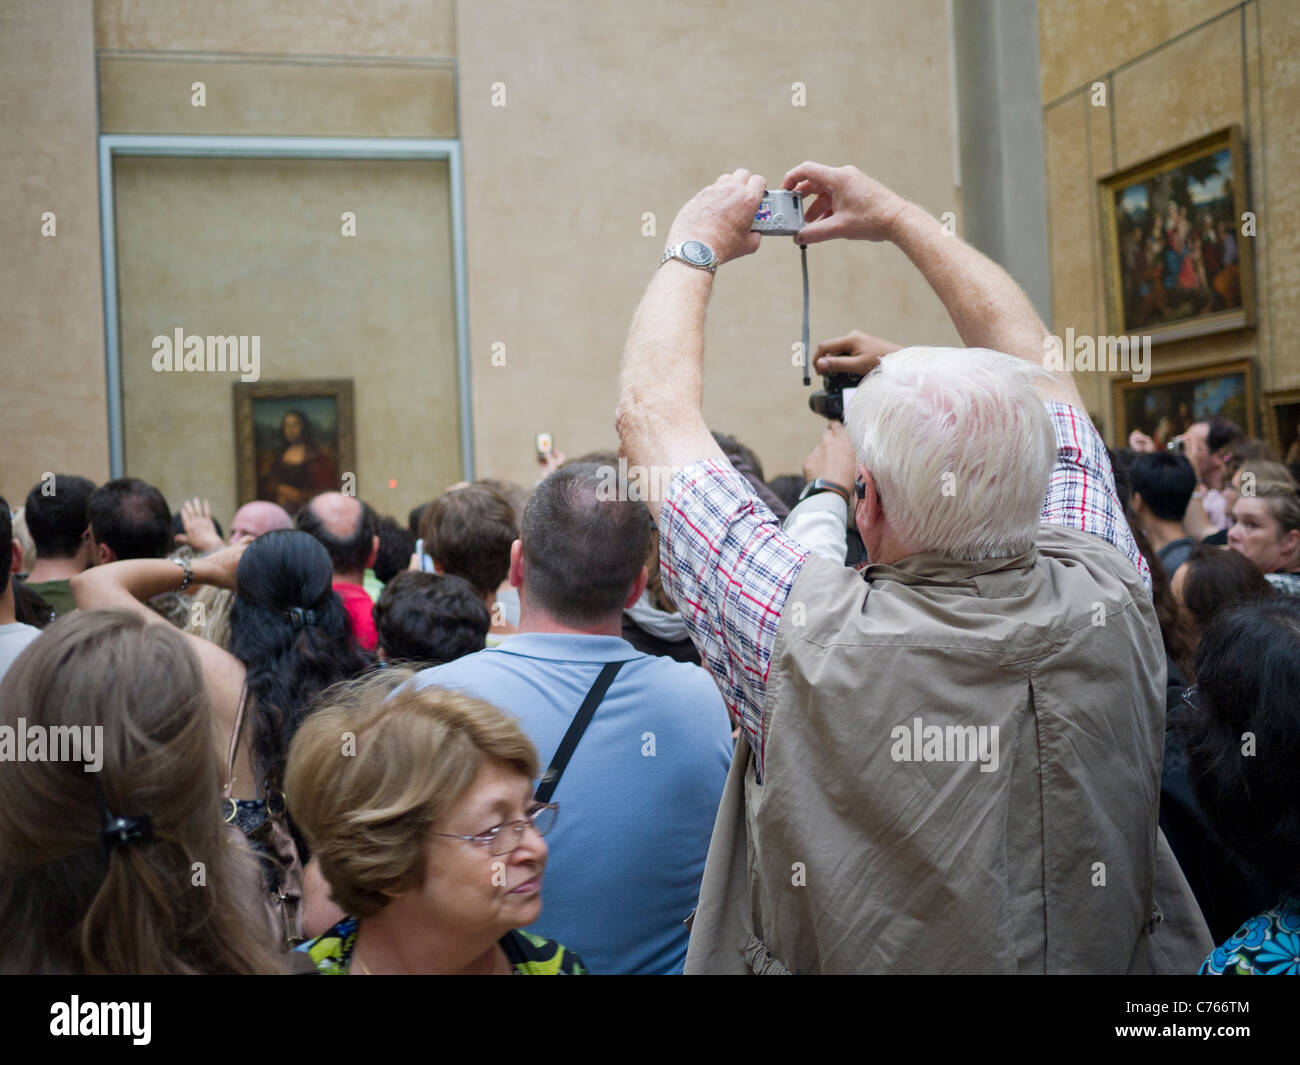 The Louvre Museum, Paris France, crowds looking at the Mona Lisa painting Stock Photo